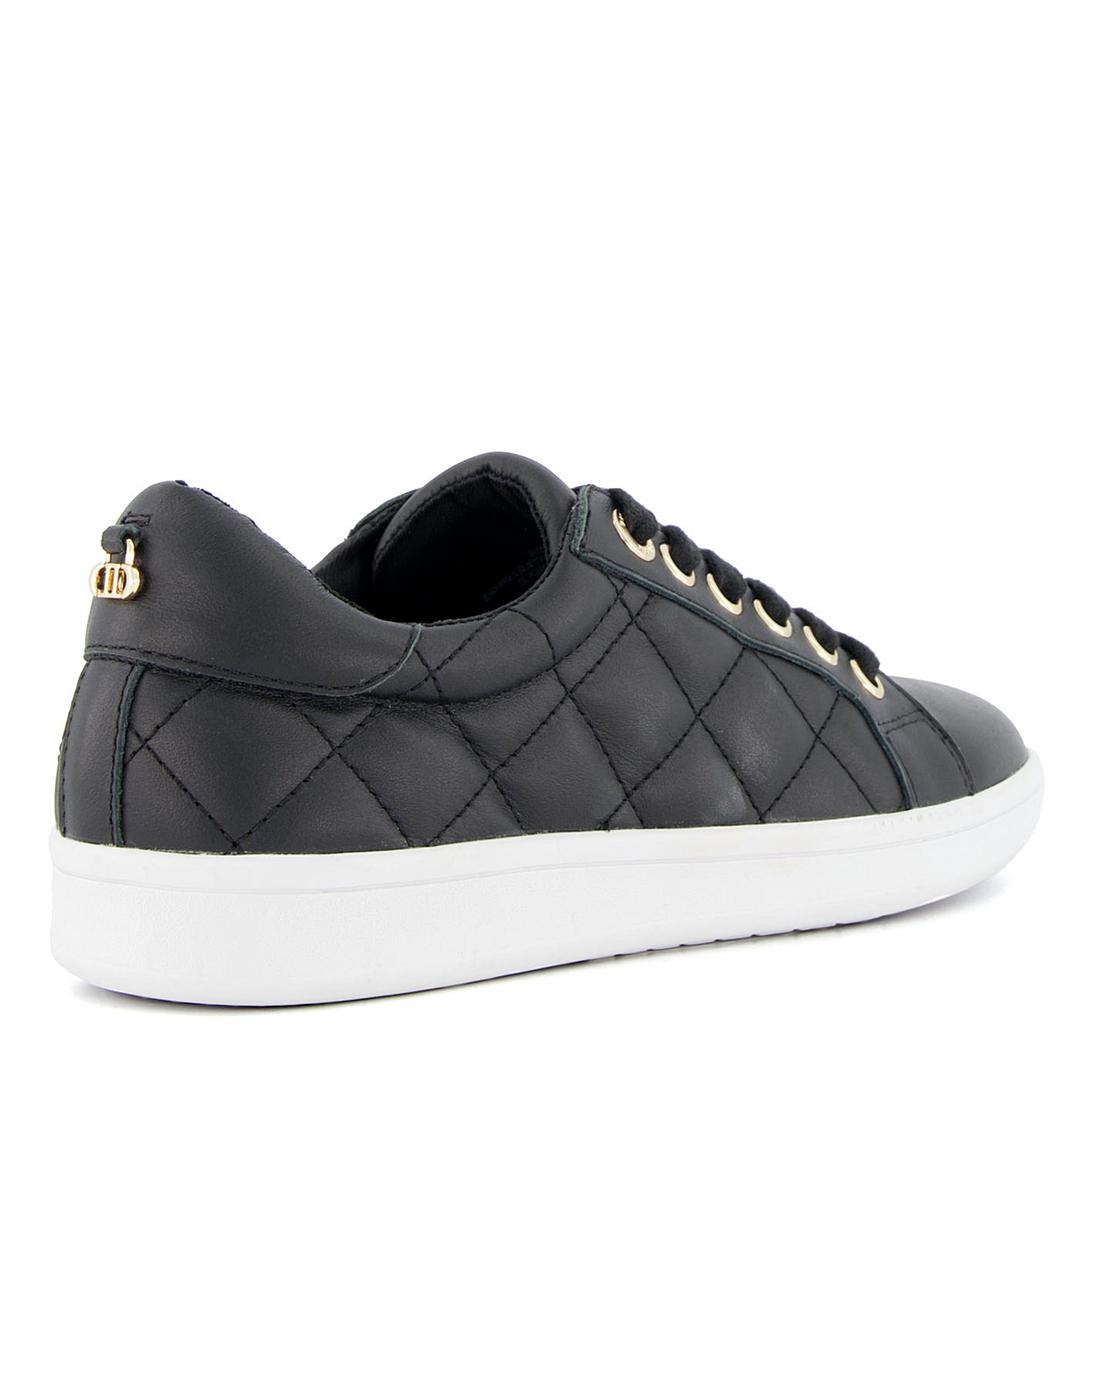 Dune Excited Quilted Trainer D Fit | Oxendales